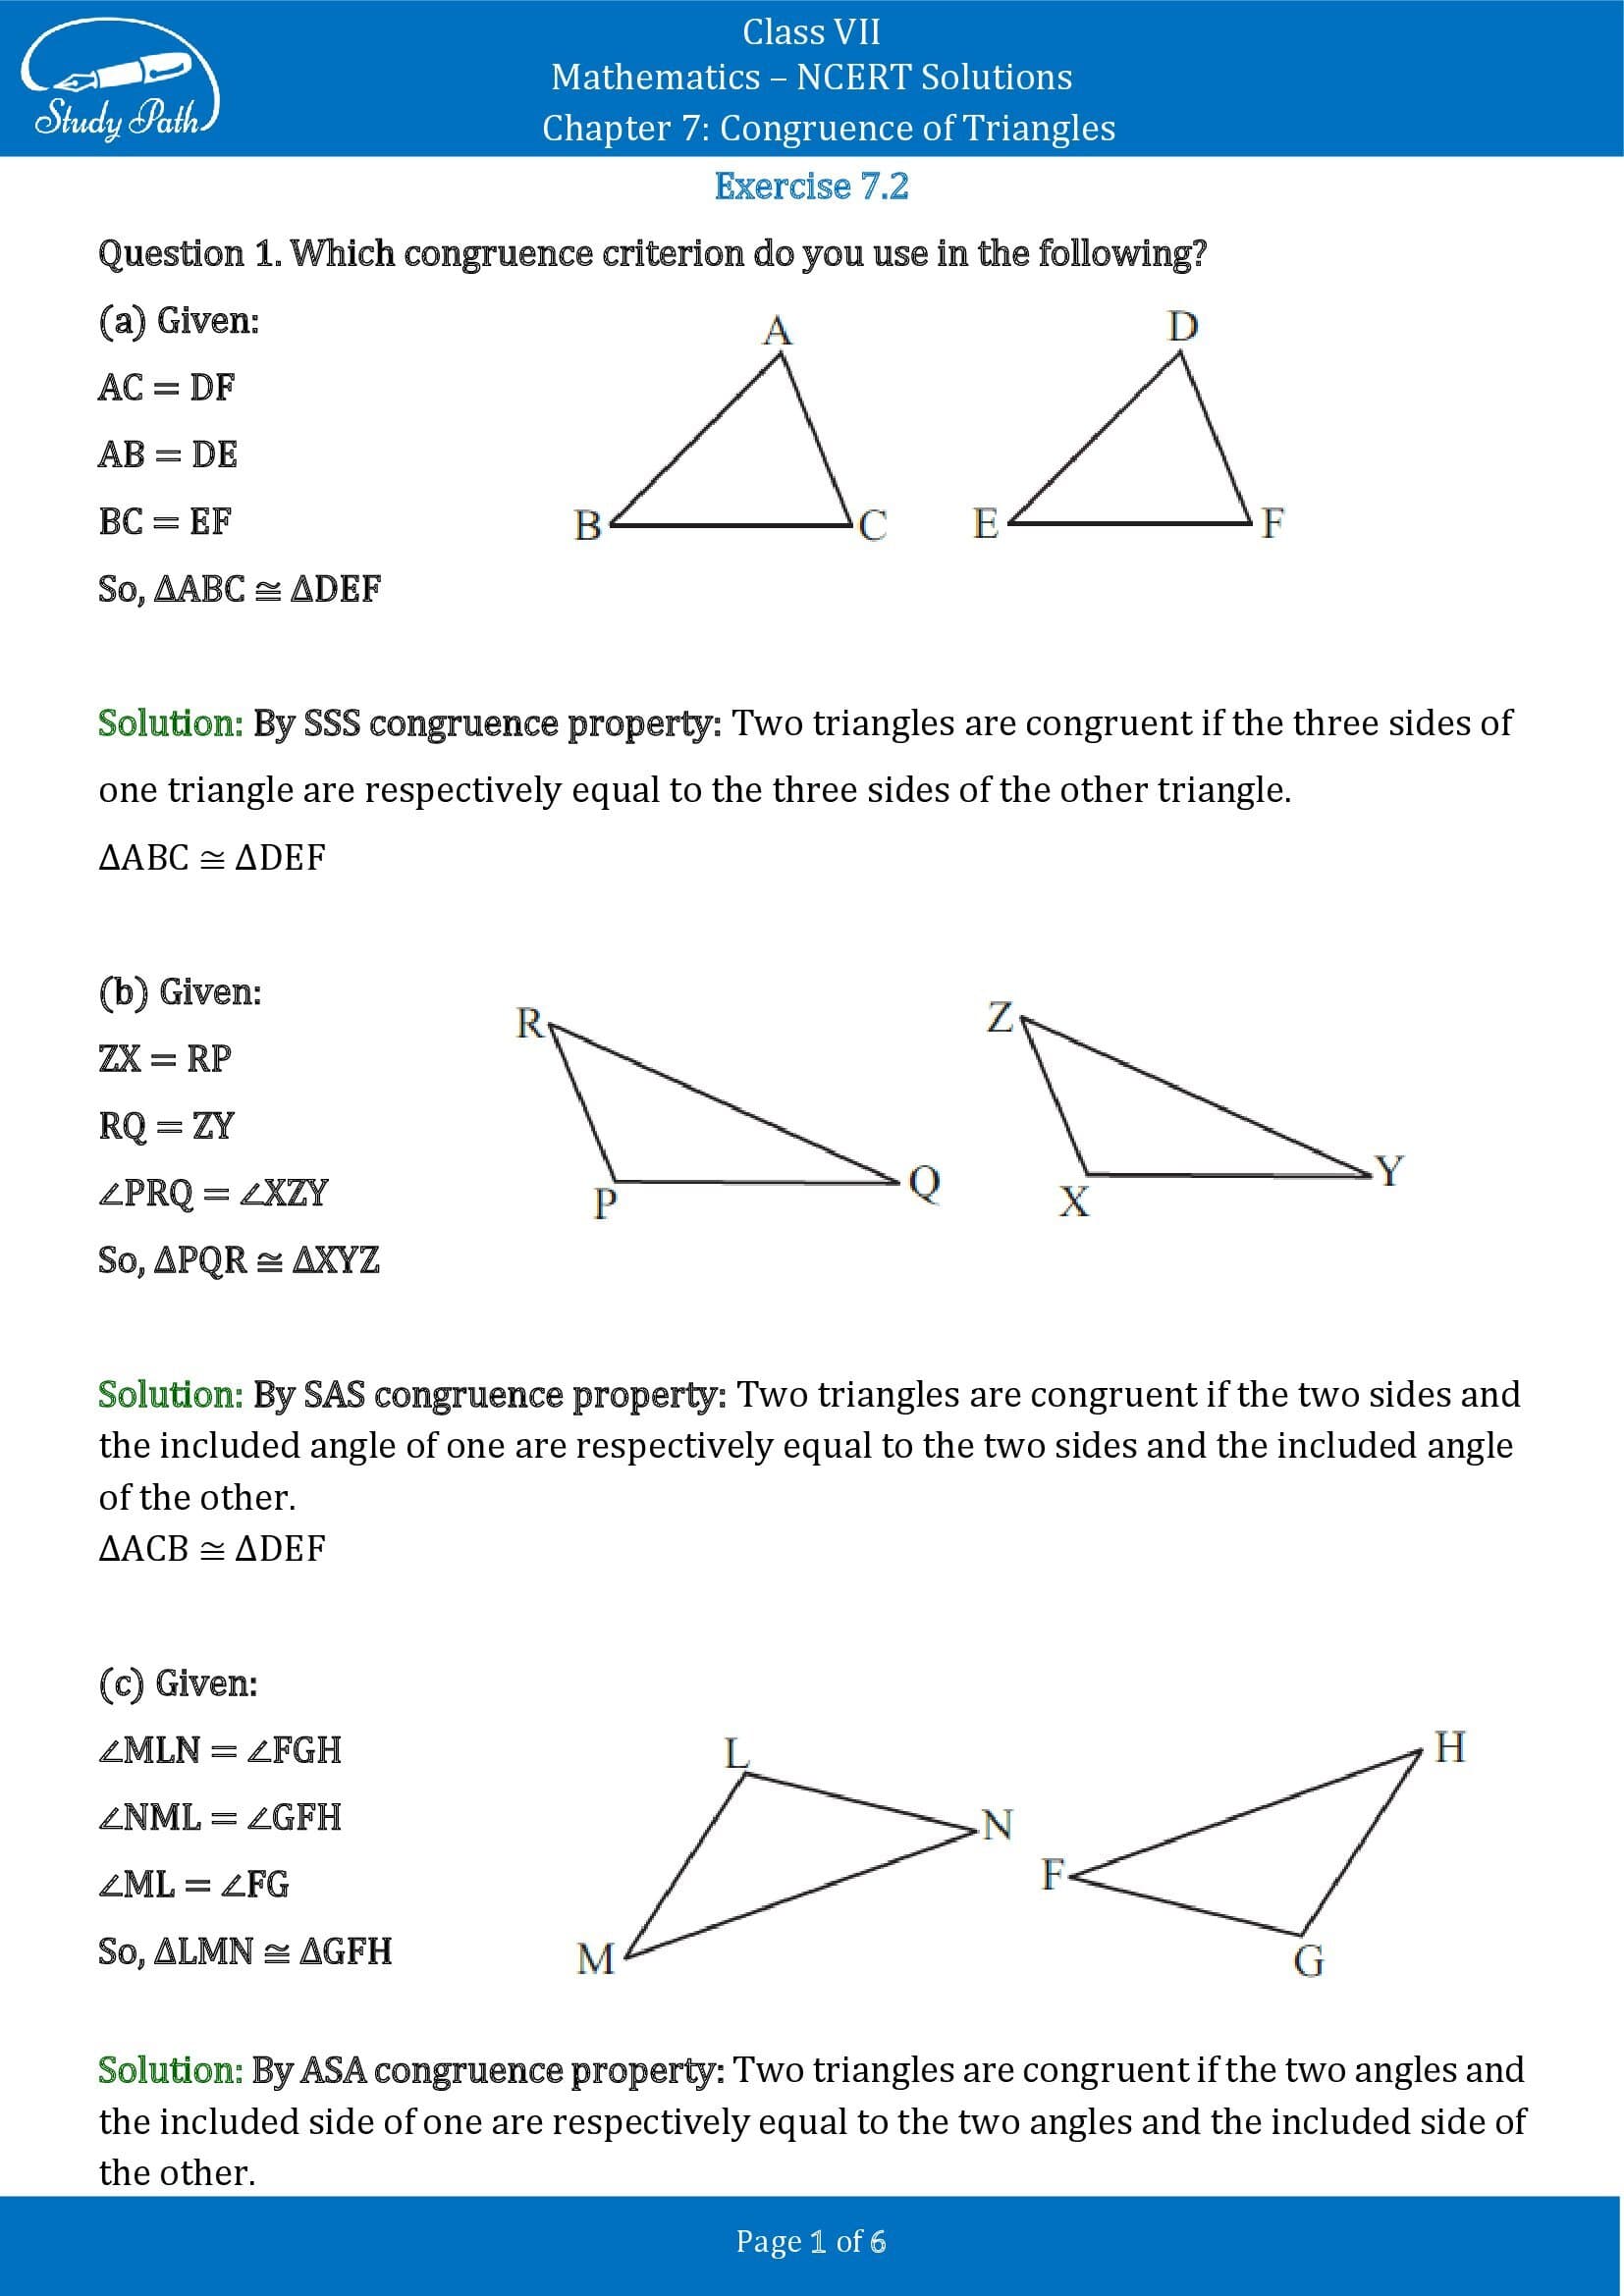 NCERT Solutions for Class 7 Maths Chapter 7 Congruence of Triangles Exercise 7.2 00001